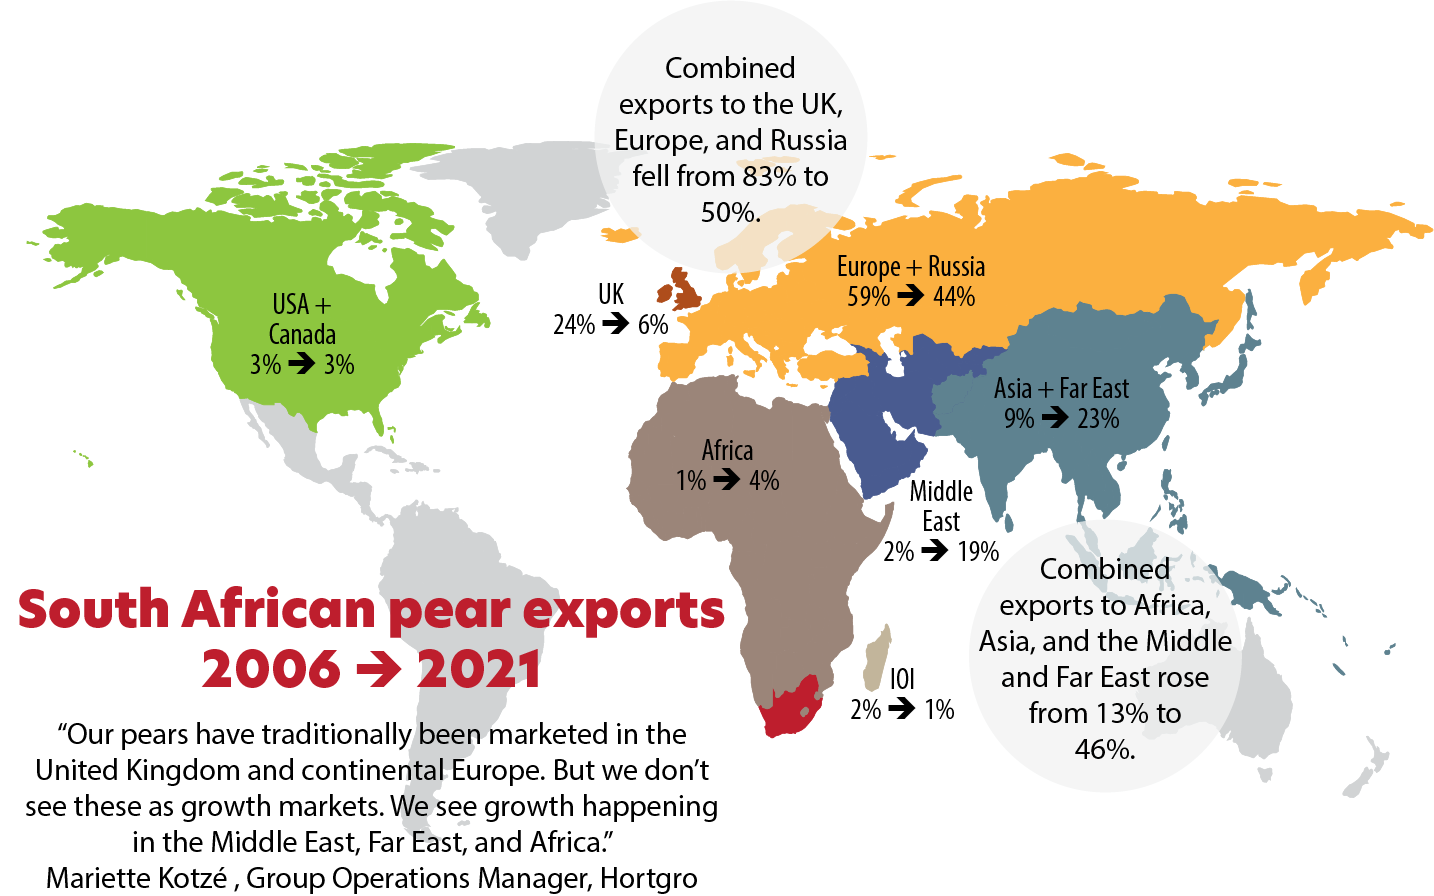 202212 Fresh Quarterly Issue 19 03 Pear Production In South Africa Figure 02